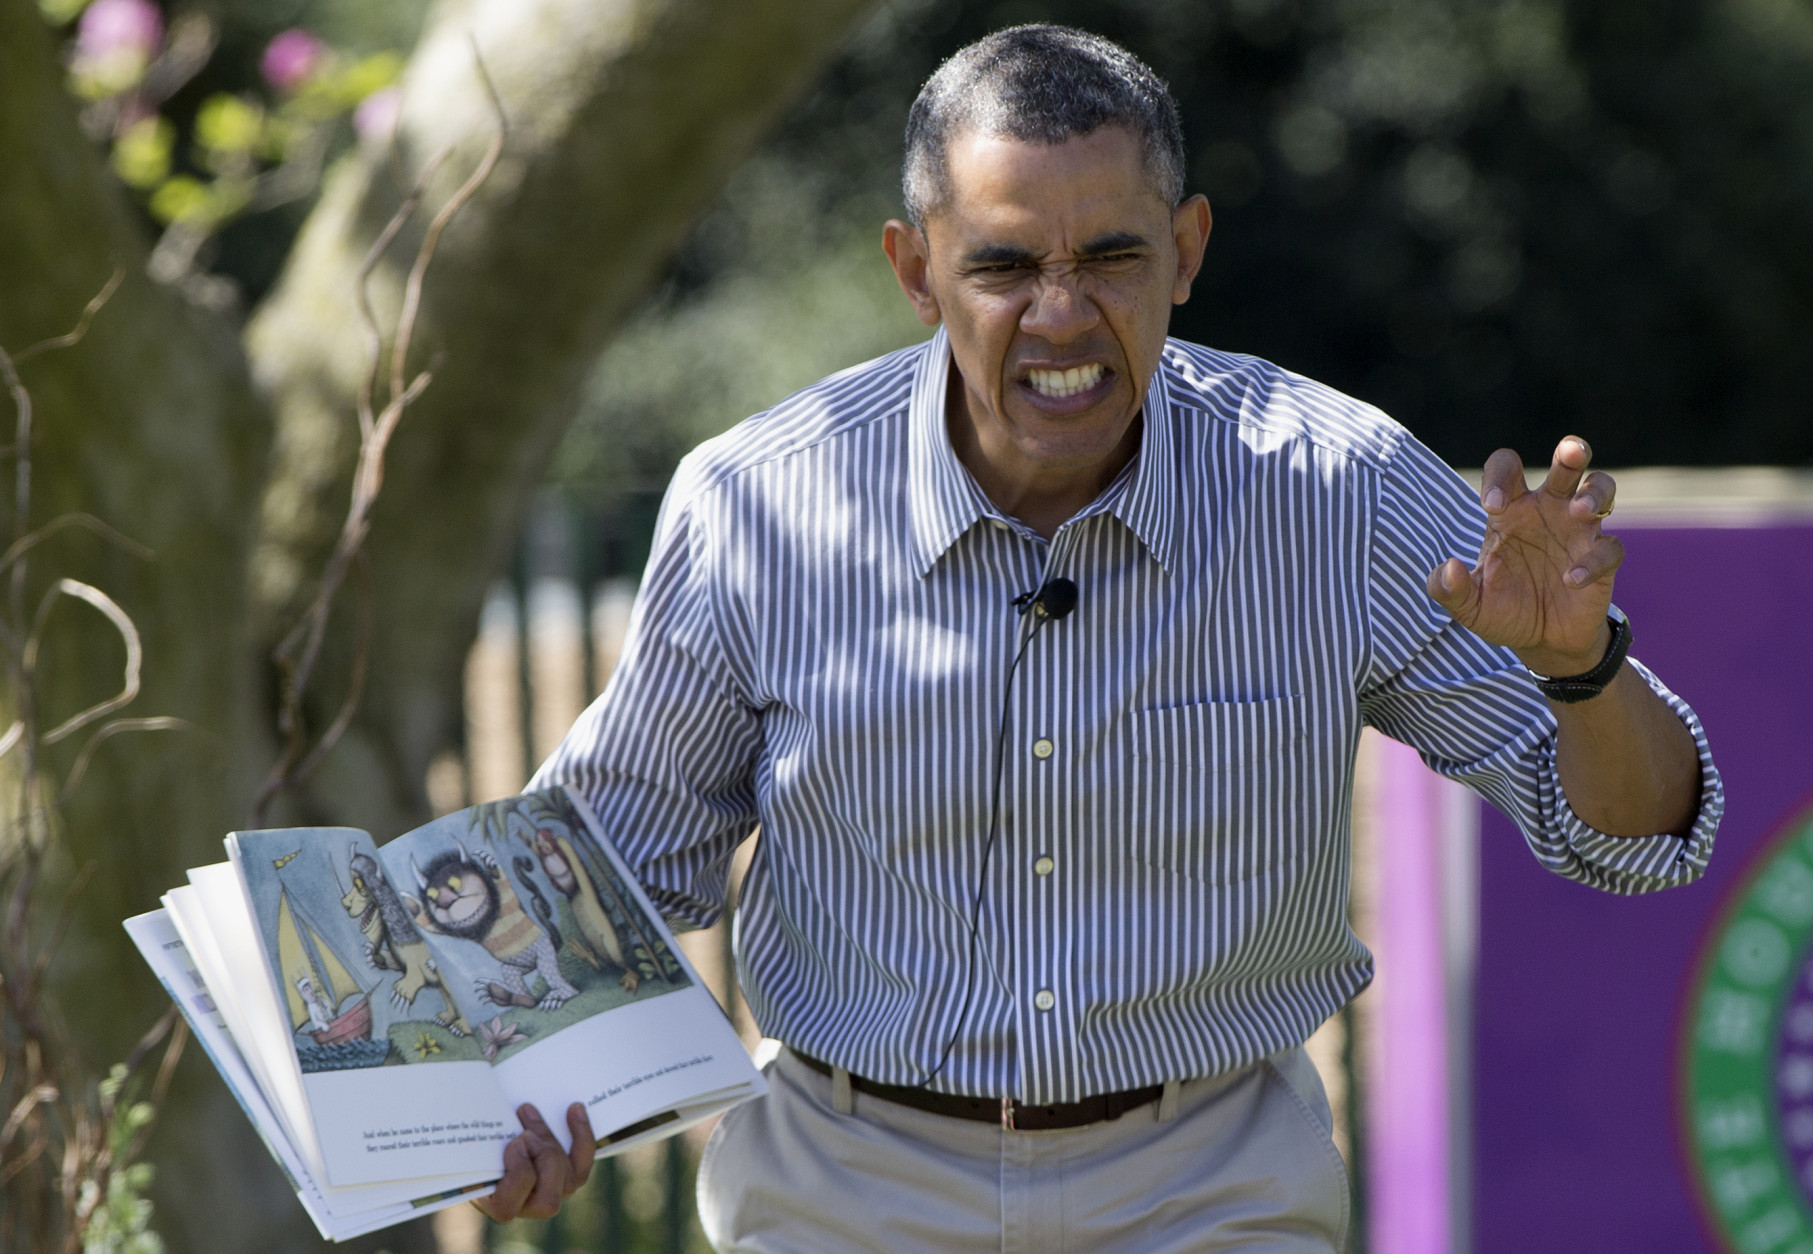 FOR USE AS DESIRED, YEAR END PHOTOS - FILE - President Barack Obama makes a face as he reads &quot;Where the Wild Things Are&quot; by Maurice Sendak, during the White House Easter Egg Roll on the South Lawn of the White House is Washington, Monday, April 21, 2014. Thousands of children gathered at the White House for the annual Easter Egg Roll. This year's event features live music, cooking stations, storytelling, and of course, some Easter egg rolling. (AP Photo/Carolyn Kaster, File)